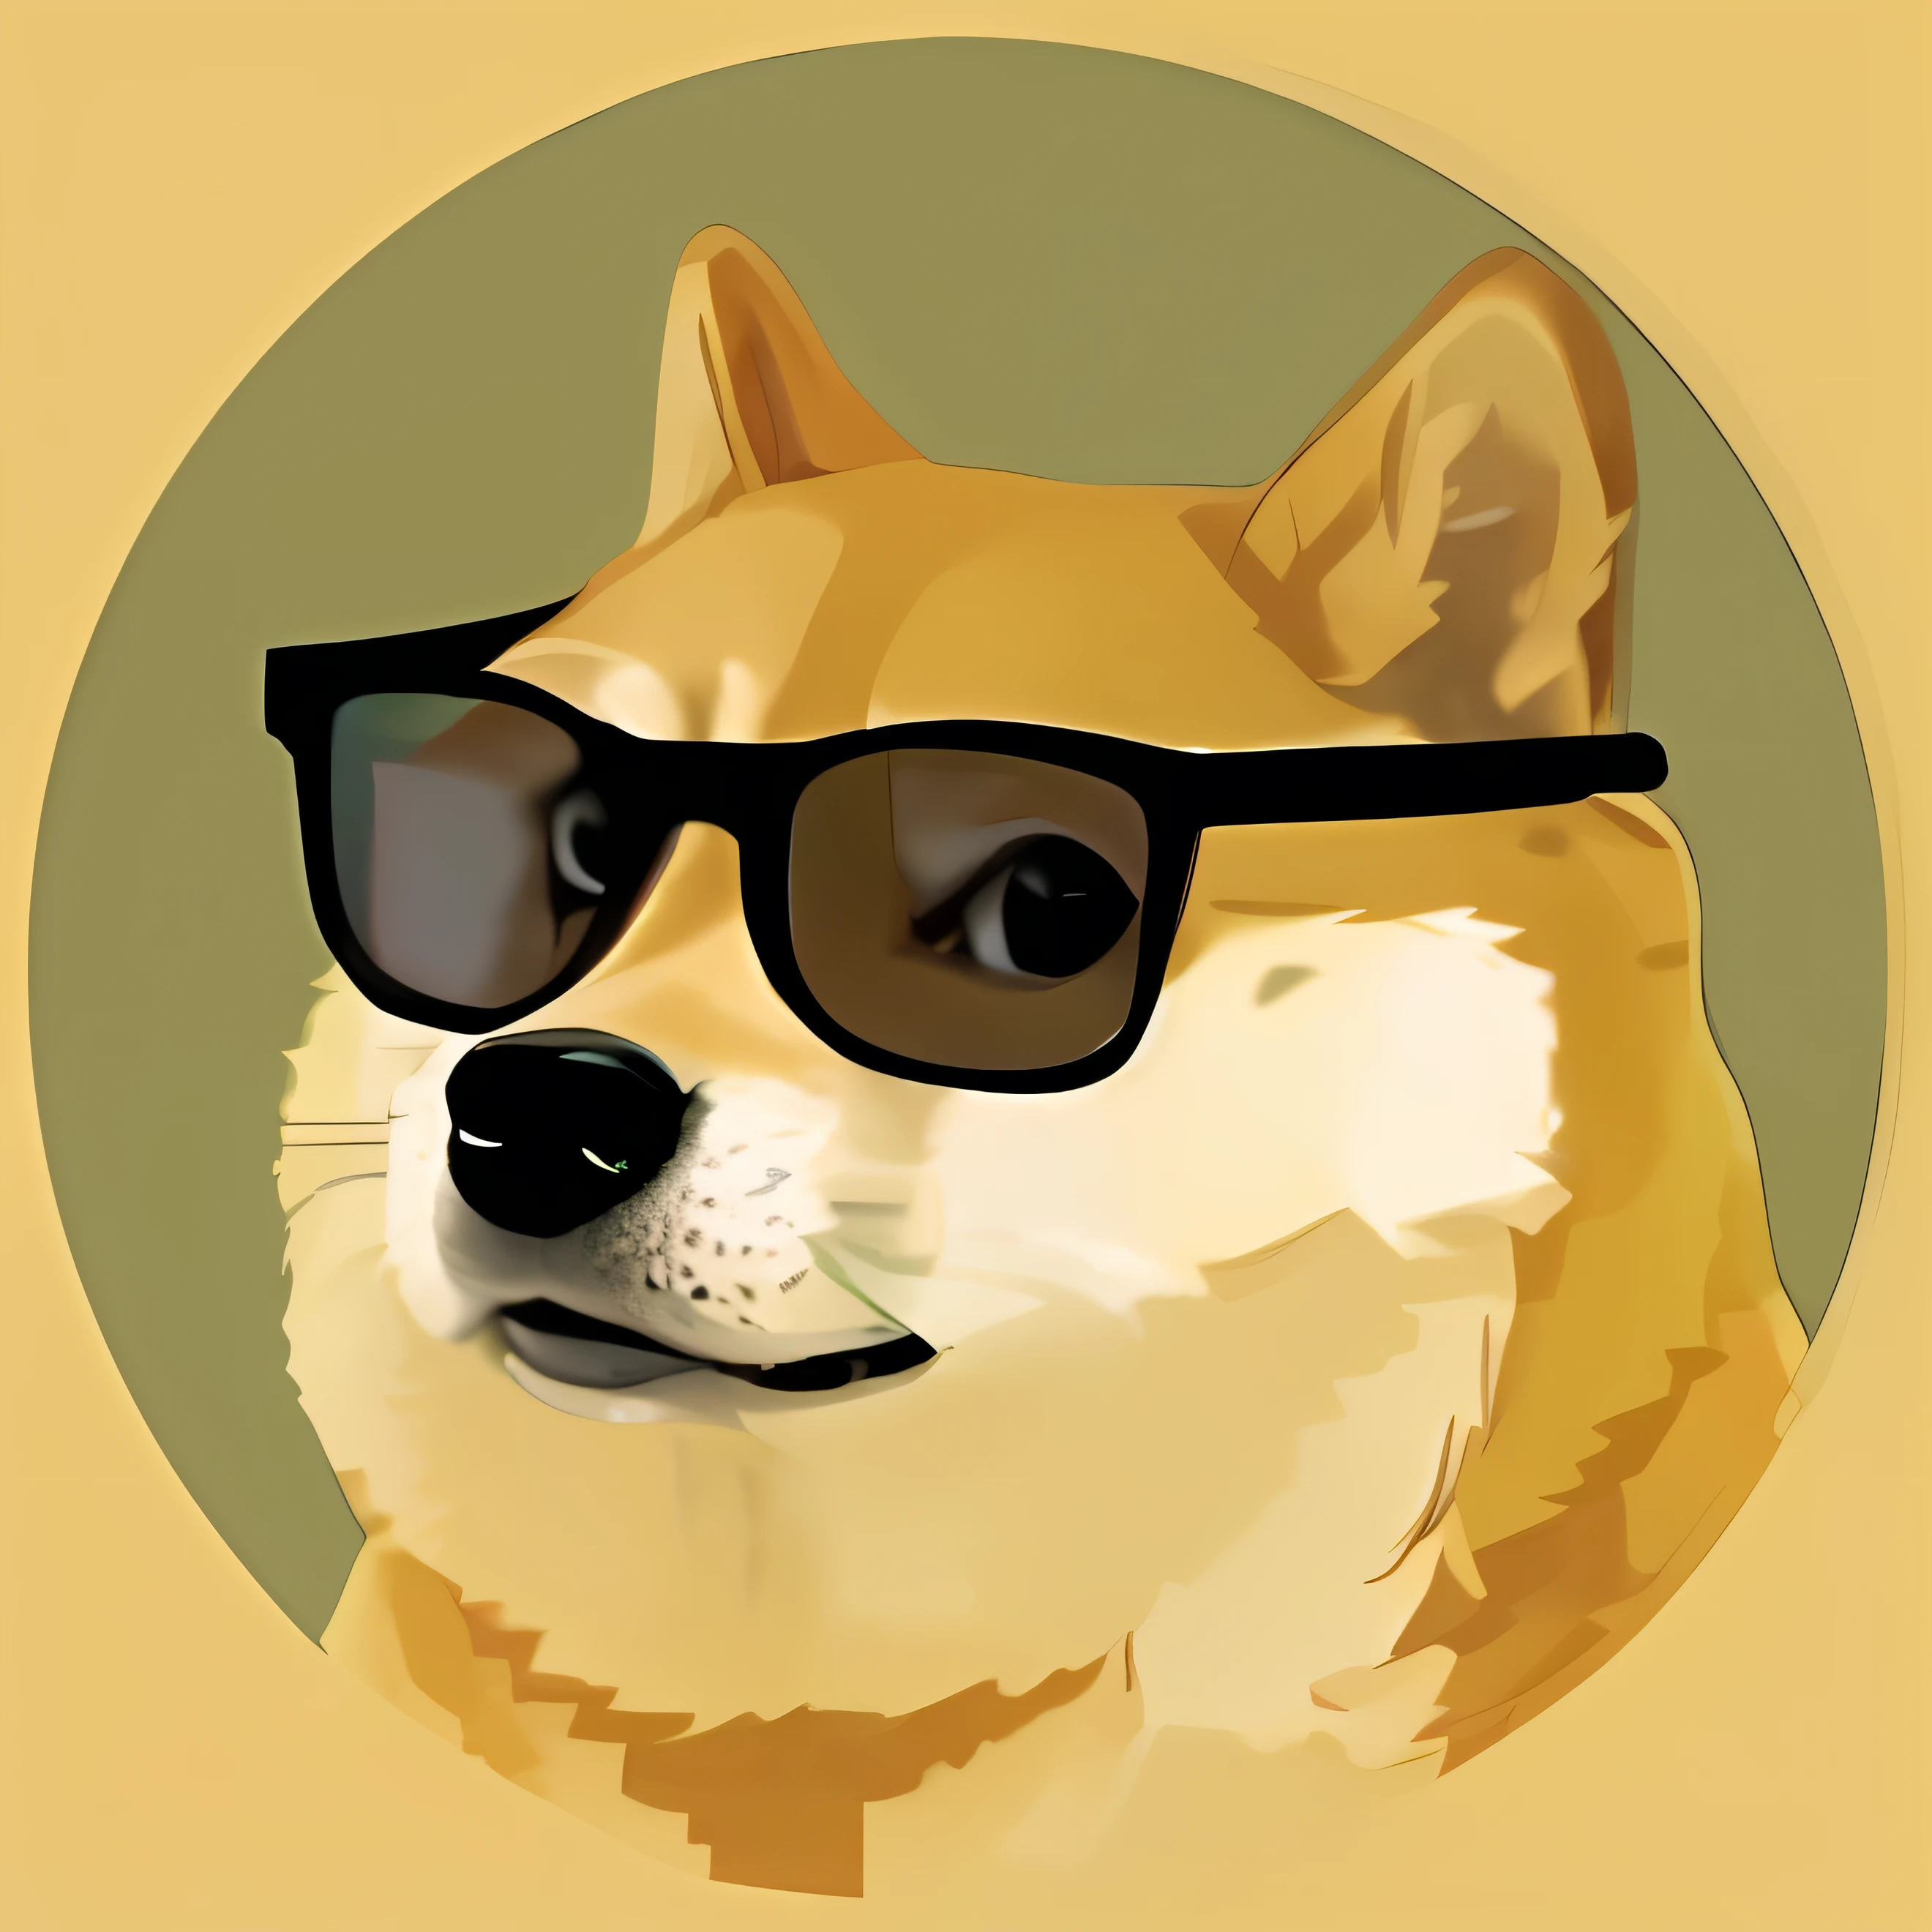 there is a dog wearing glasses and a tie on a yellow background, doge, doge meme, typical cryptocurrency nerd, 🚀🚀🚀, discord profile picture, anthropomorphic shiba inu, crypto, inspired by Shiba Kōkan, looking heckin cool and stylish, dokev, samdoesart, an ai generated image, shibu inu